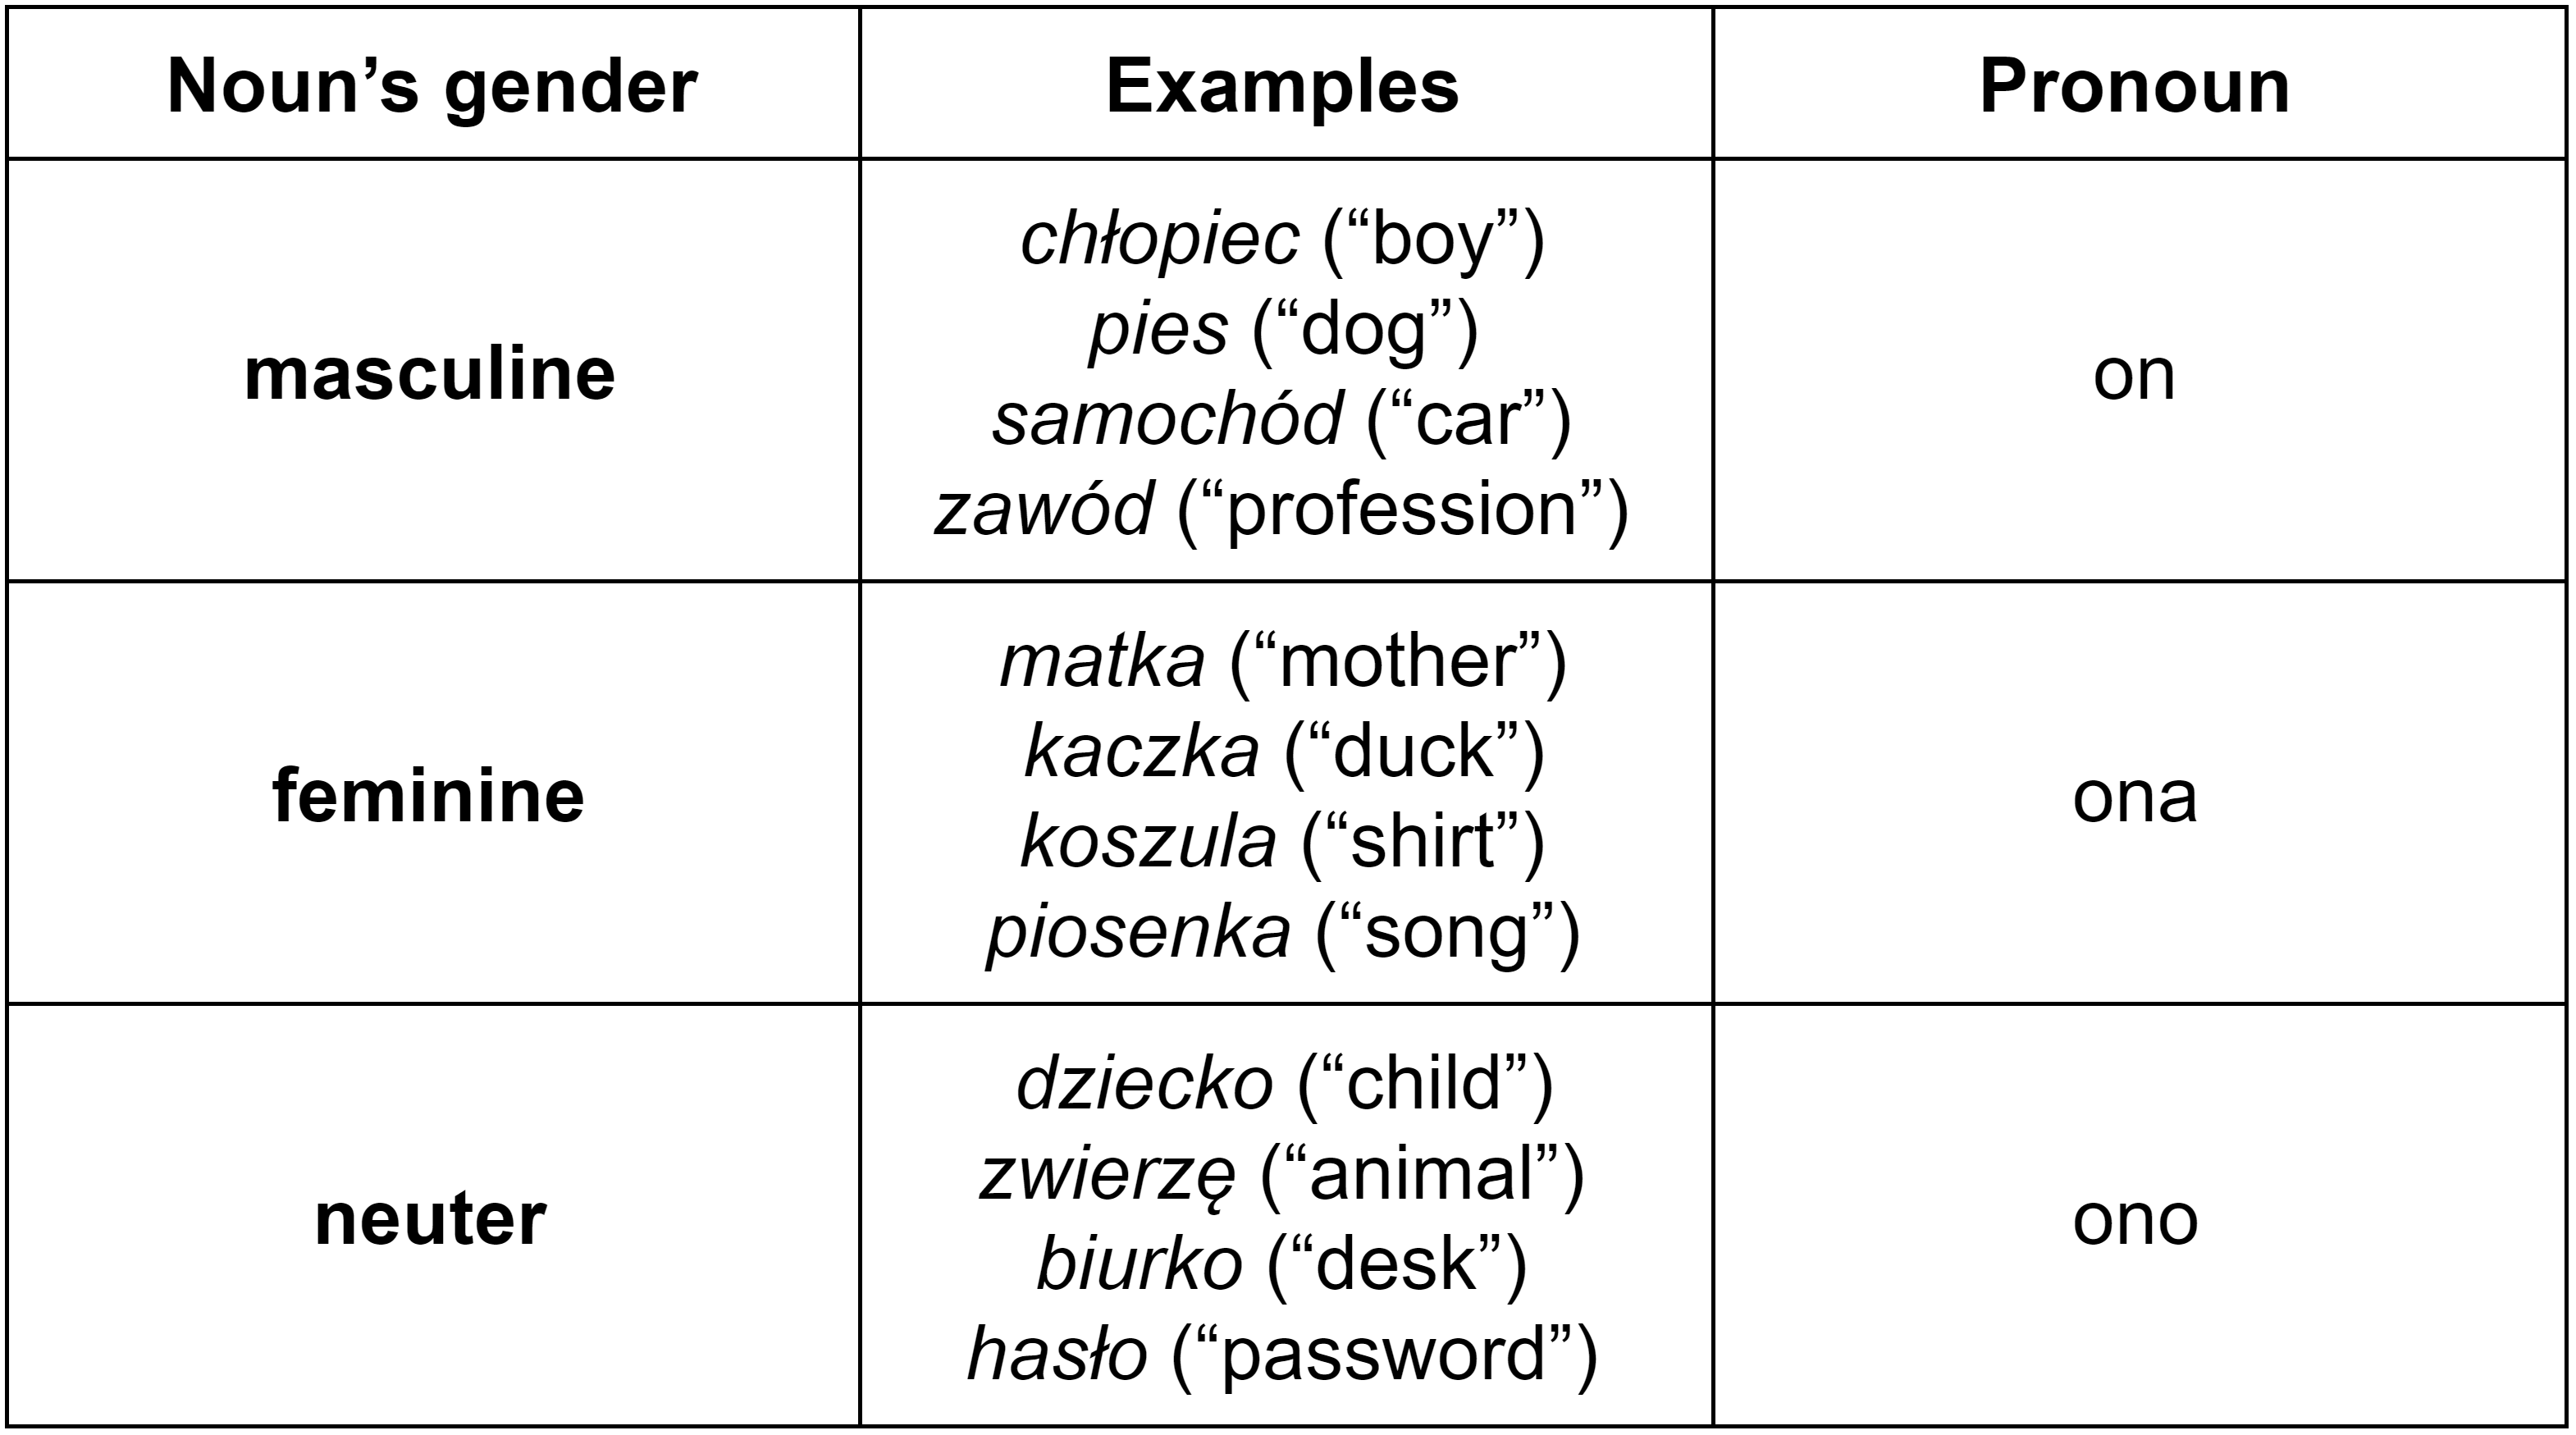 Polish personal pronouns and gender table (masculine “on”, feminine “ona”, and neuter “ono”)